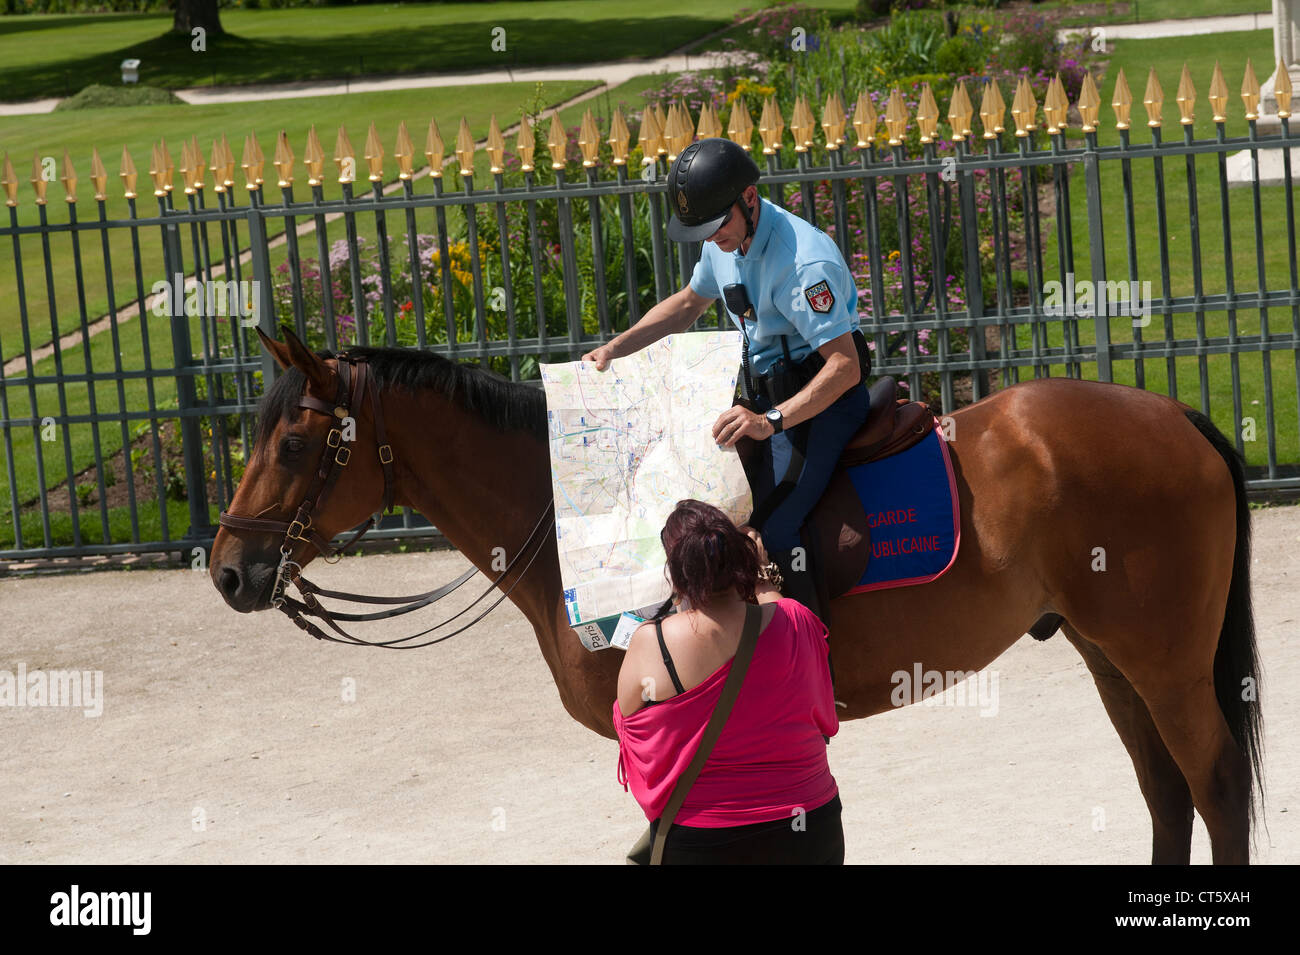 Paris, France - A policeman on horse giving informations to a tourist. Stock Photo